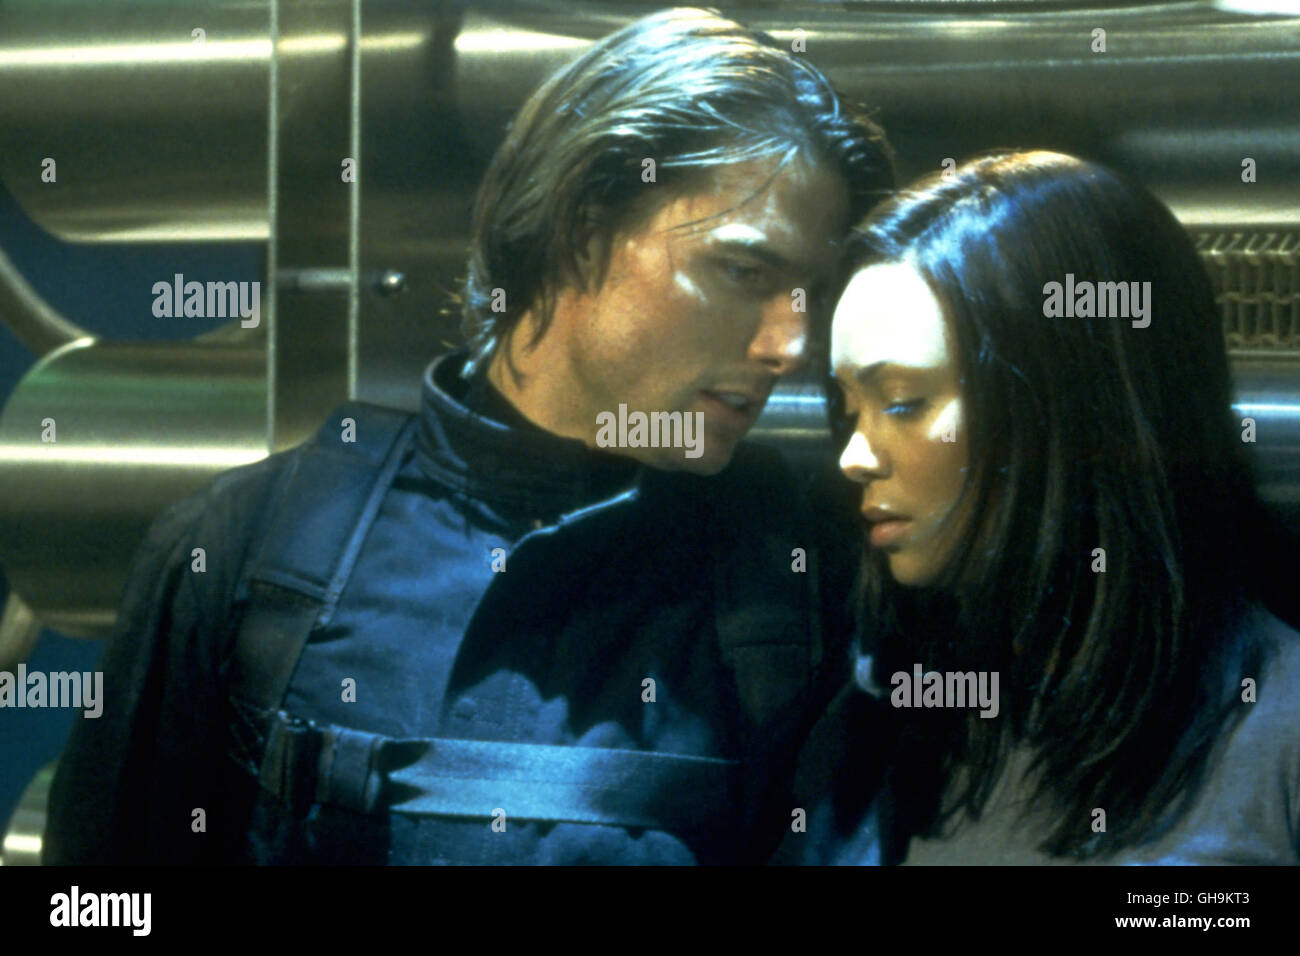 MISSION IMPOSSIBLE II Mission: Impossible II USA 2000 John Woo Ethan Hunt (TOM CRUISE) und Nyah Nordoff-Hall (THANDIE NEWTON) Film, Fernsehen, Actionfilm Regie: John Woo aka. Mission: Impossible II Stock Photo